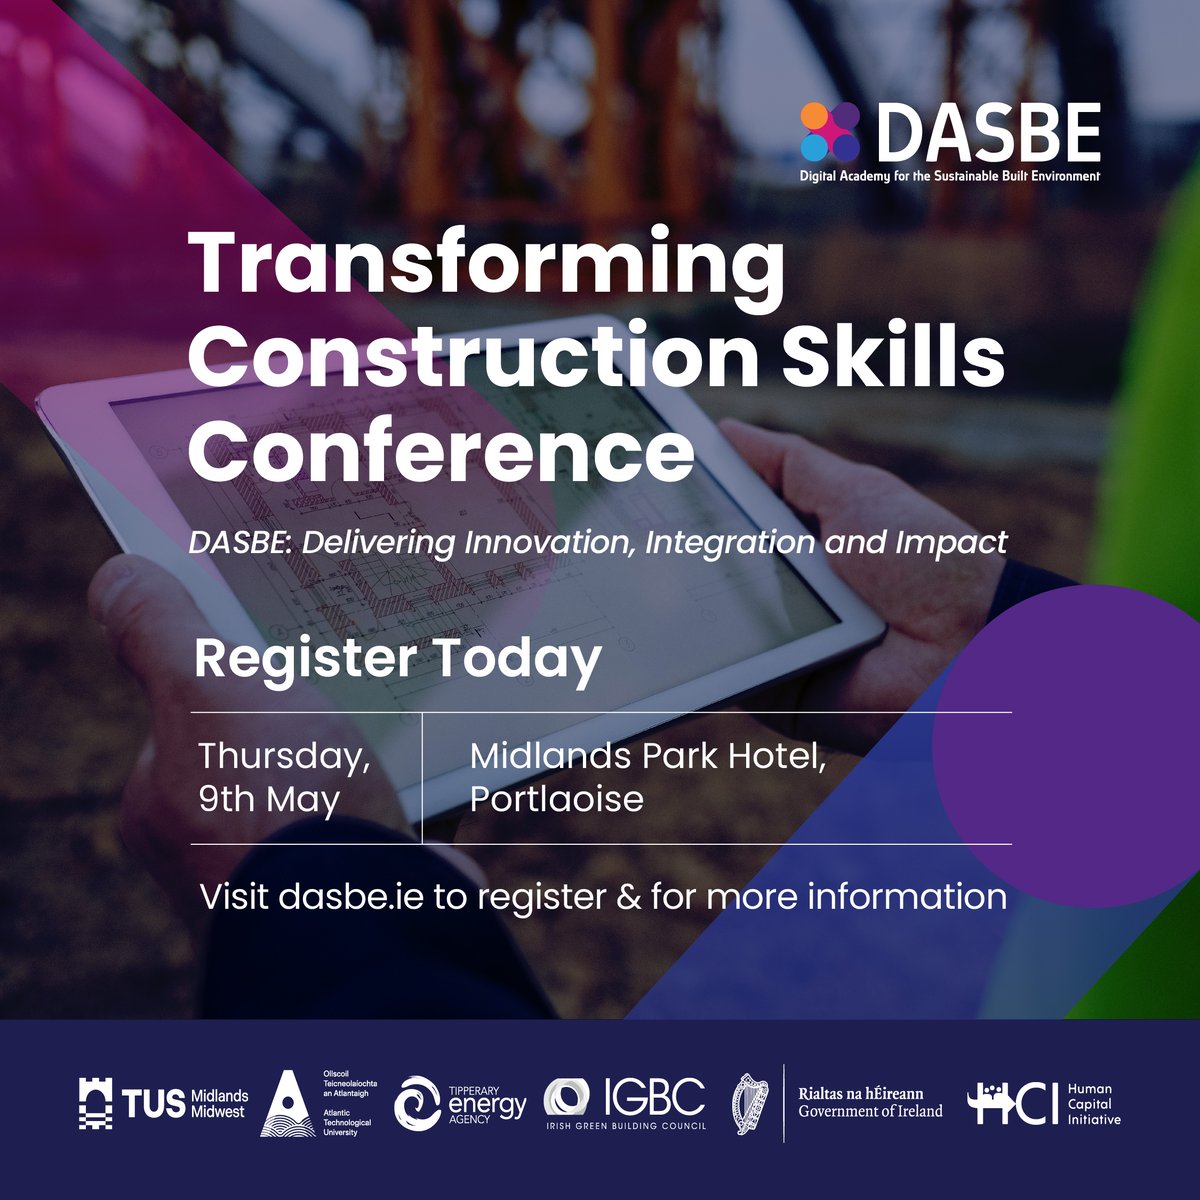 Don't forget to register for #DASBE's upcoming event this Thursday. Join leading educators, industry representatives & experts as they delve into challenges facing the construction sector. 📅 Midlands Park Hotel, Portlaoise 📍9th May. 9.30am - 4pm Book ➡️ dasbe.ie/transforming-c…